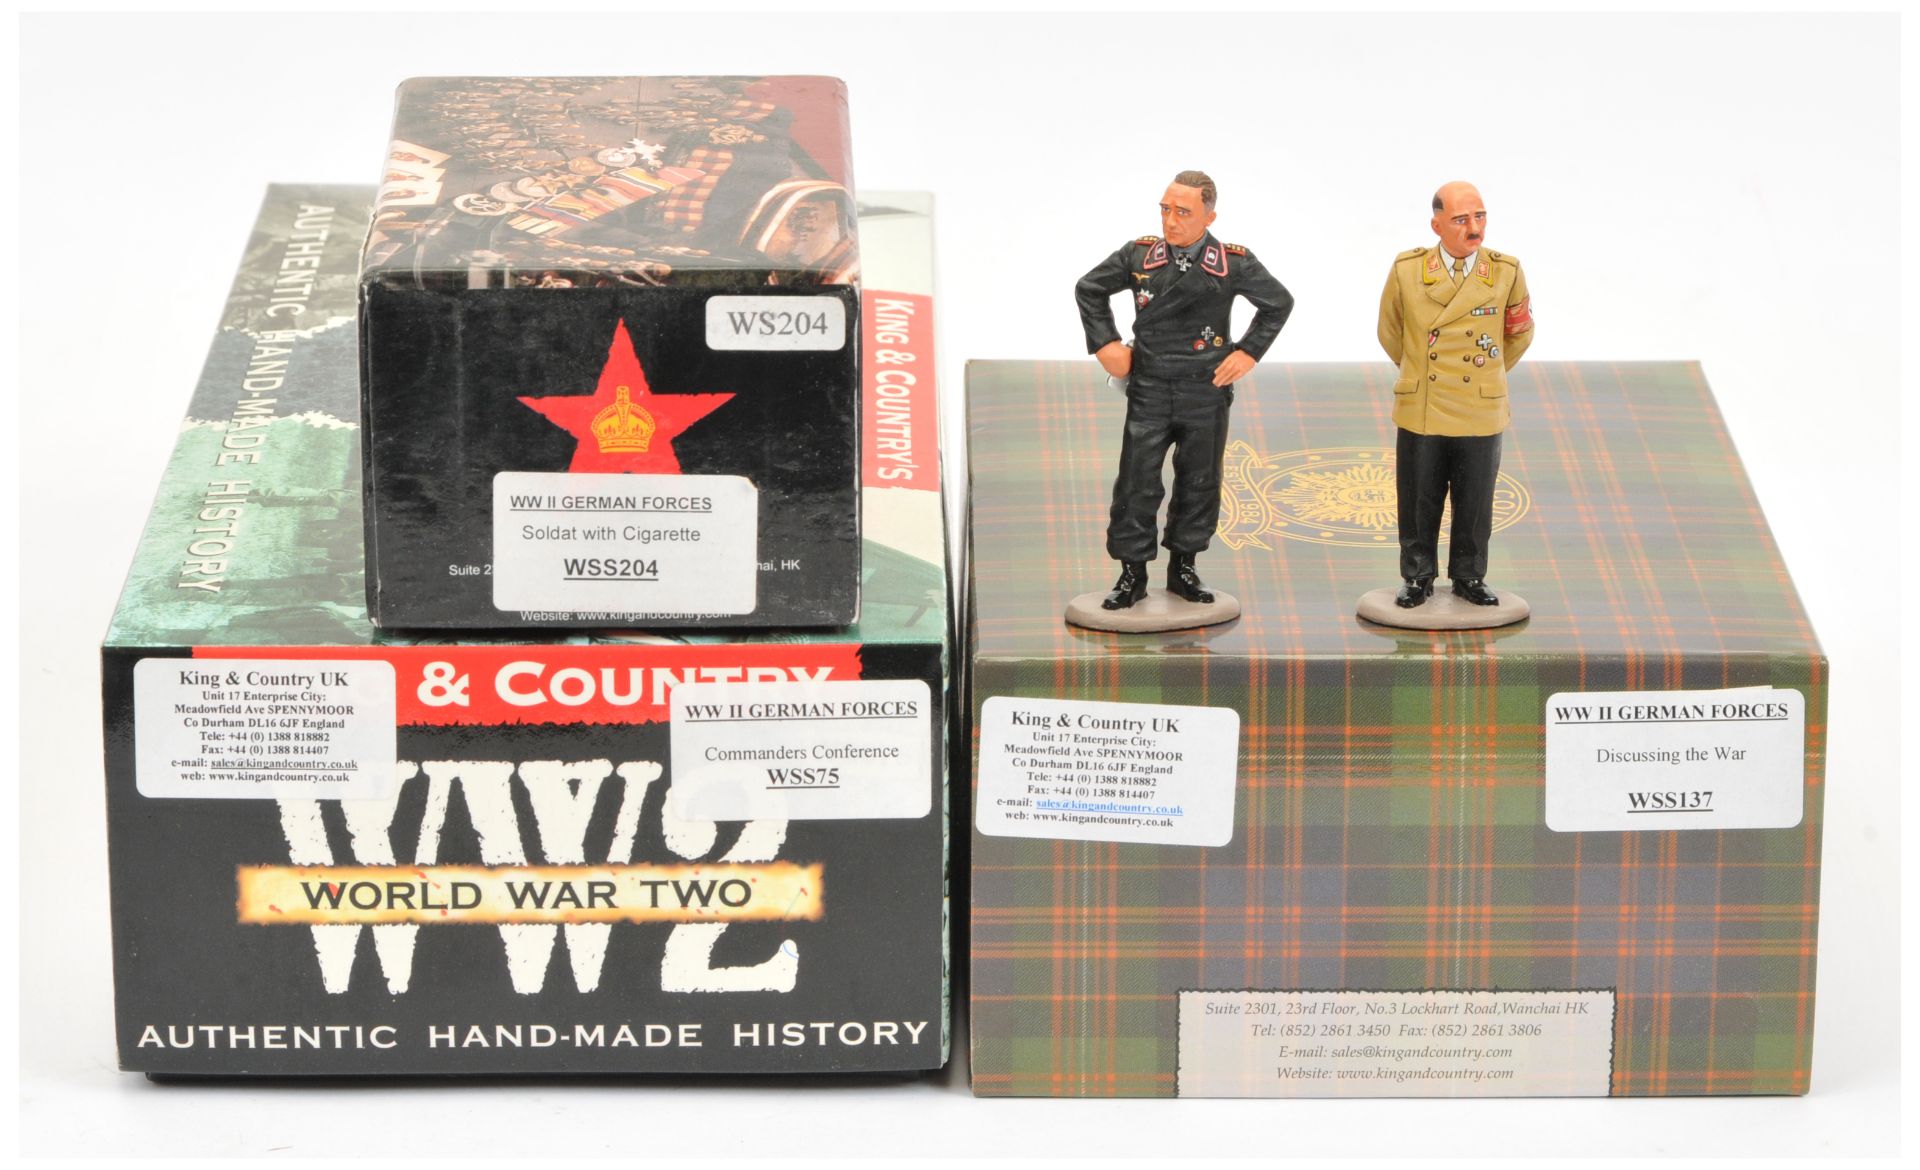 King & Country - 'WW II German Forces' Series, including Set Nos. WSS75 'Commanders Conference'